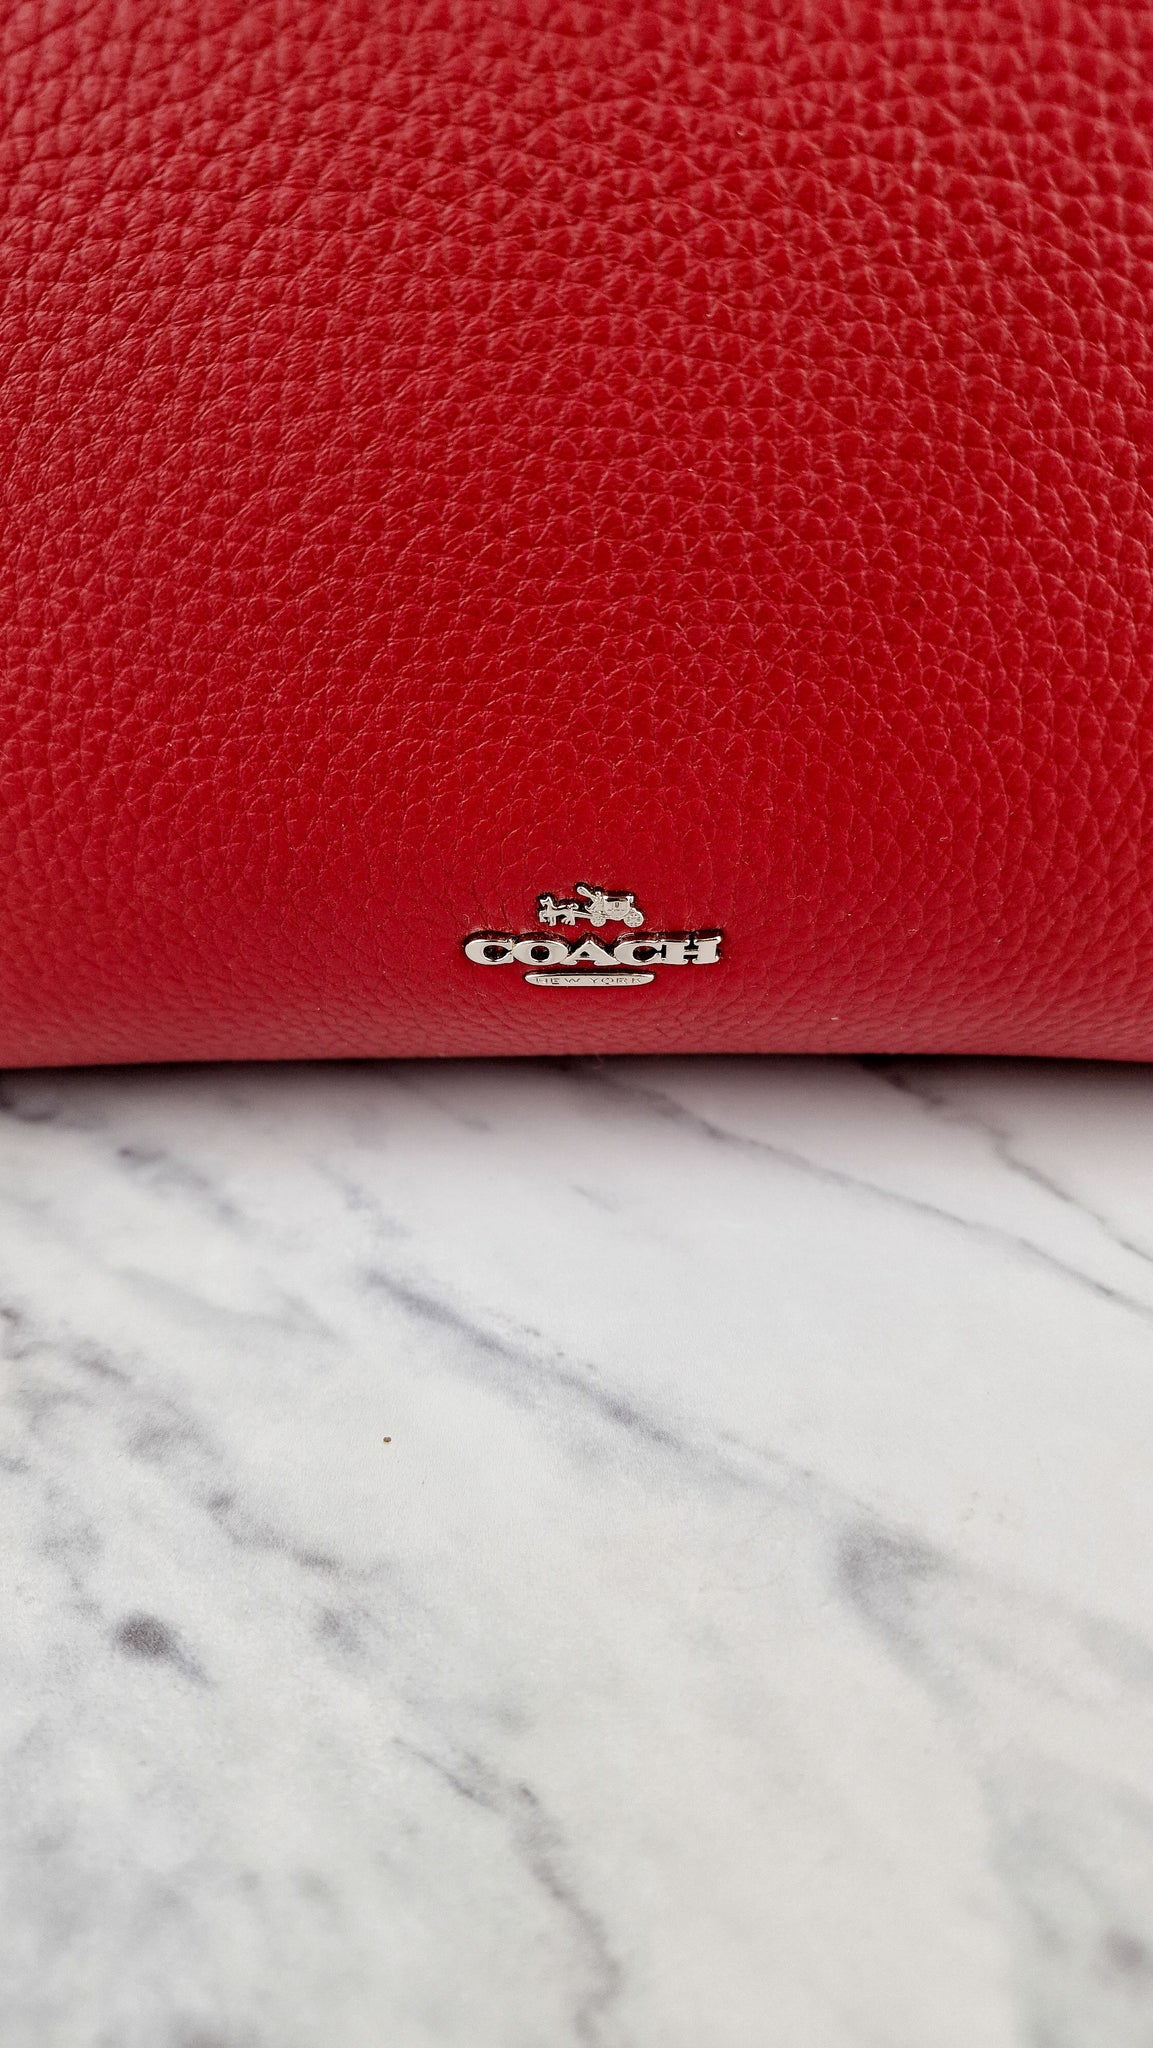 I Bought Myself The Coach Parker Bag In Metallic Red Leather!!! - Fashion  For Lunch